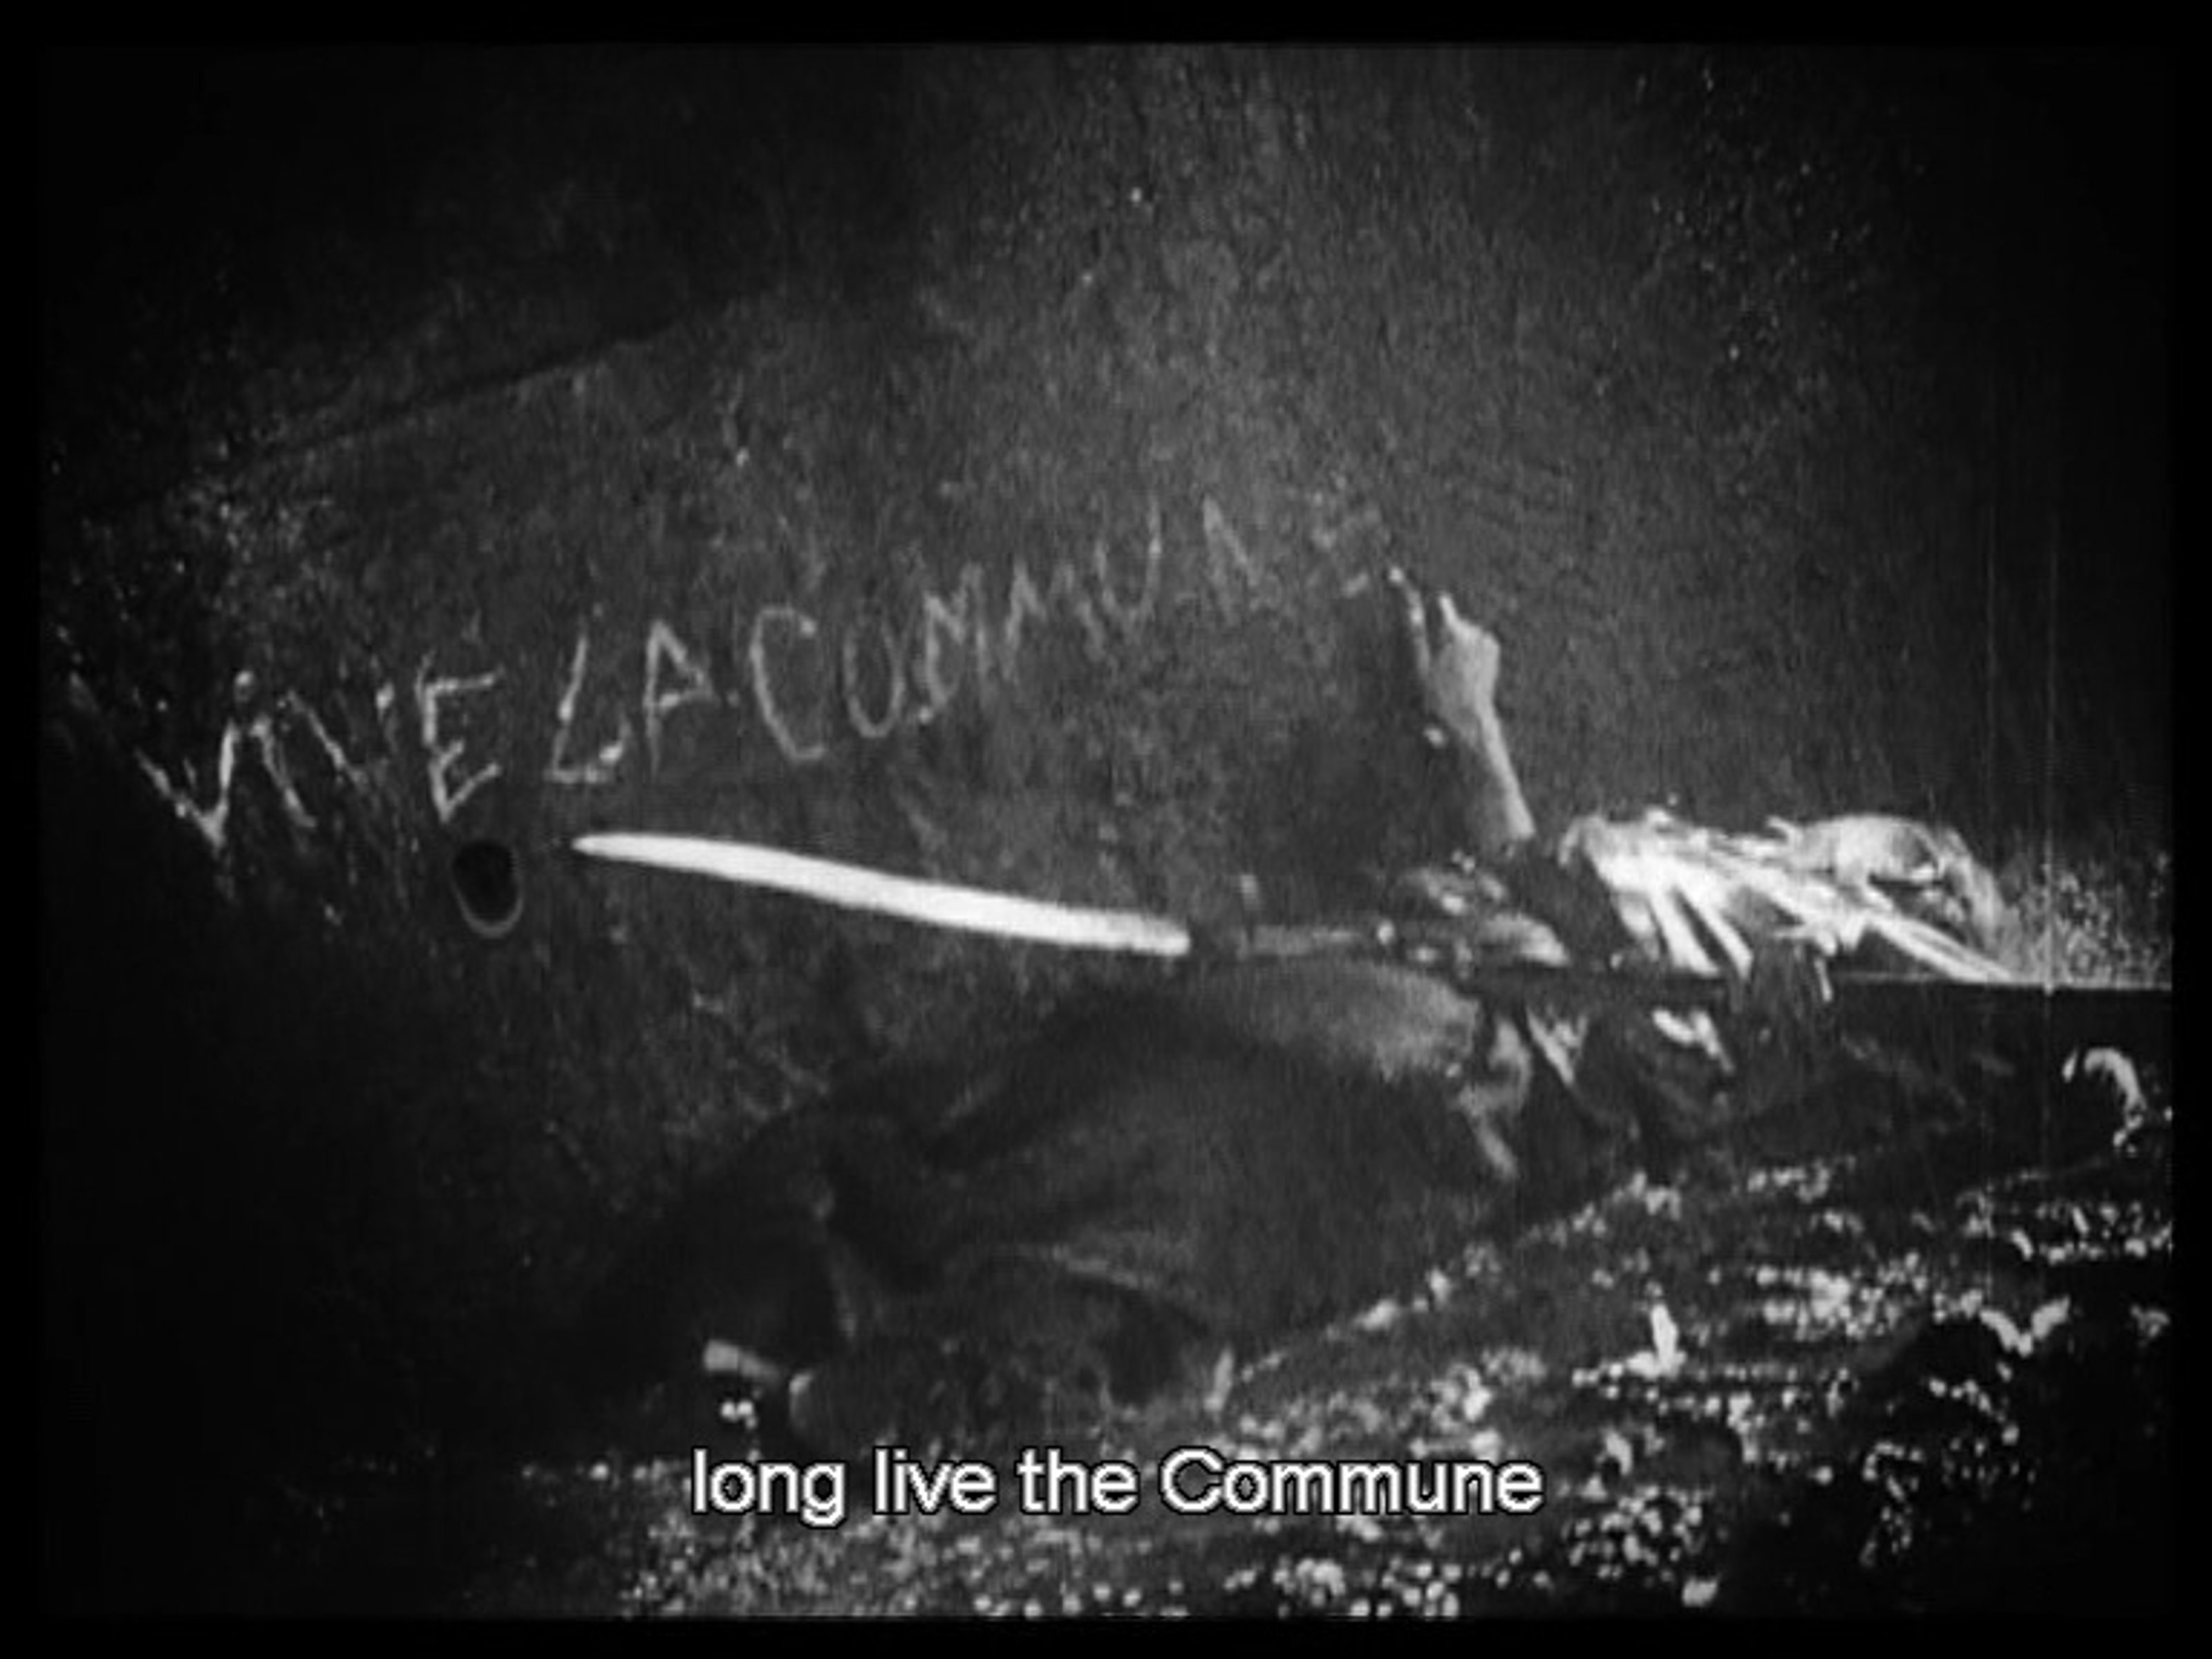 Movie still, someone lying in the rain, possibly dying, while writing Vive La Commune (Long Live the Commune) on a wall